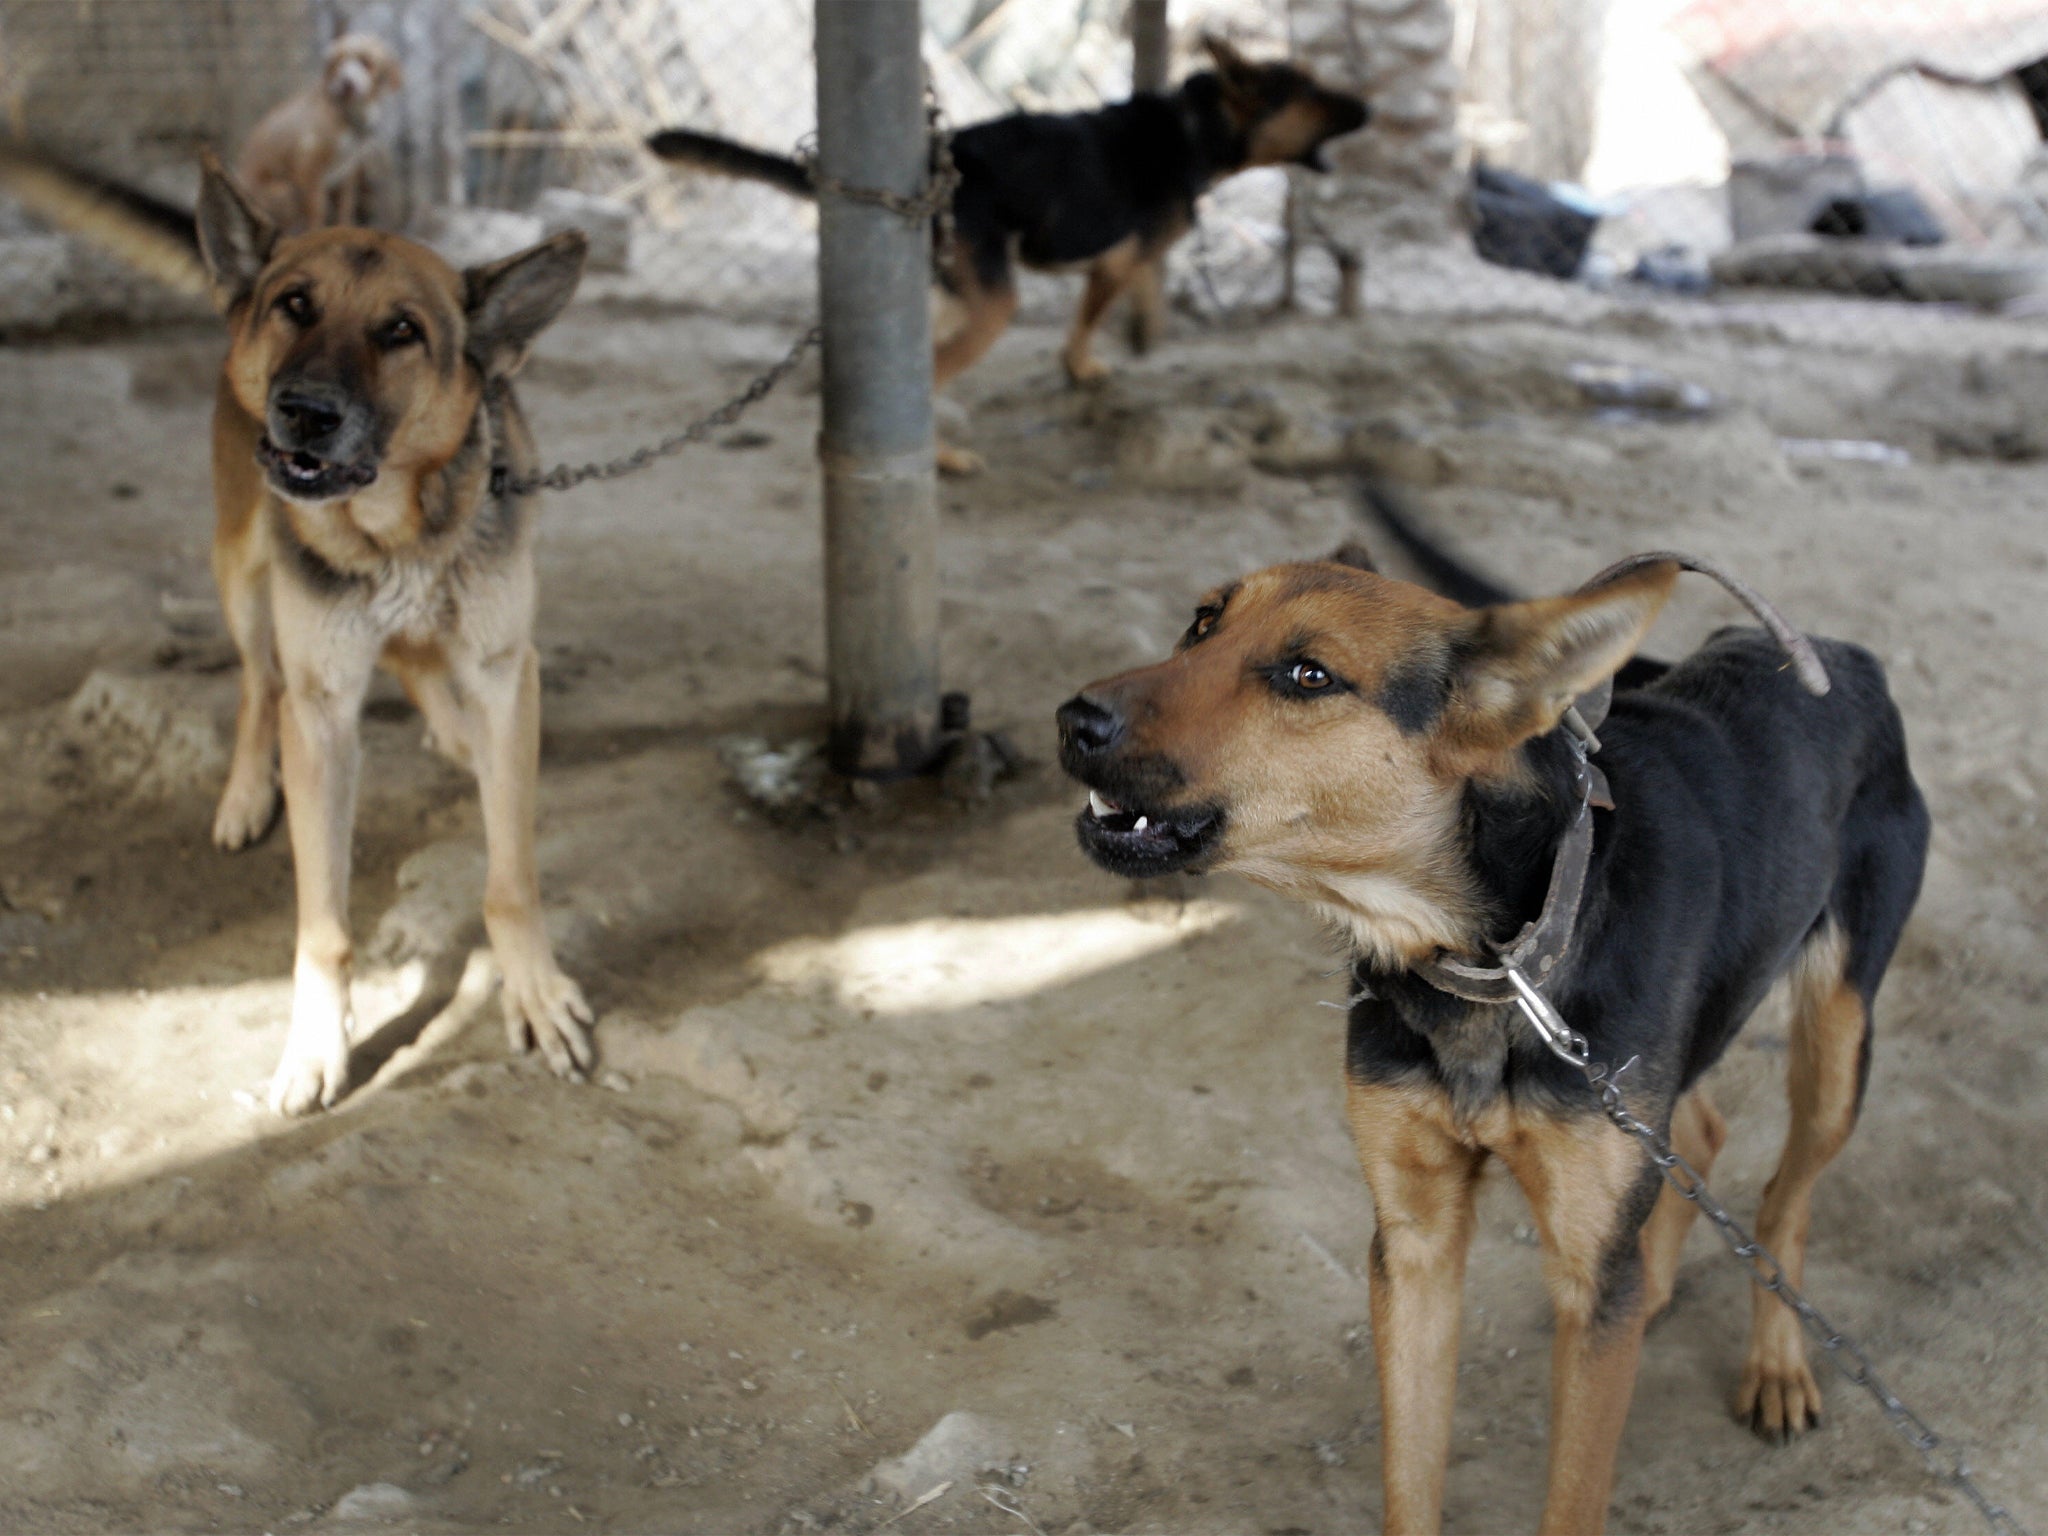 File: Dozens of contracted dogs working with the US military were left behind in Afghanistan amid the hasty pullout